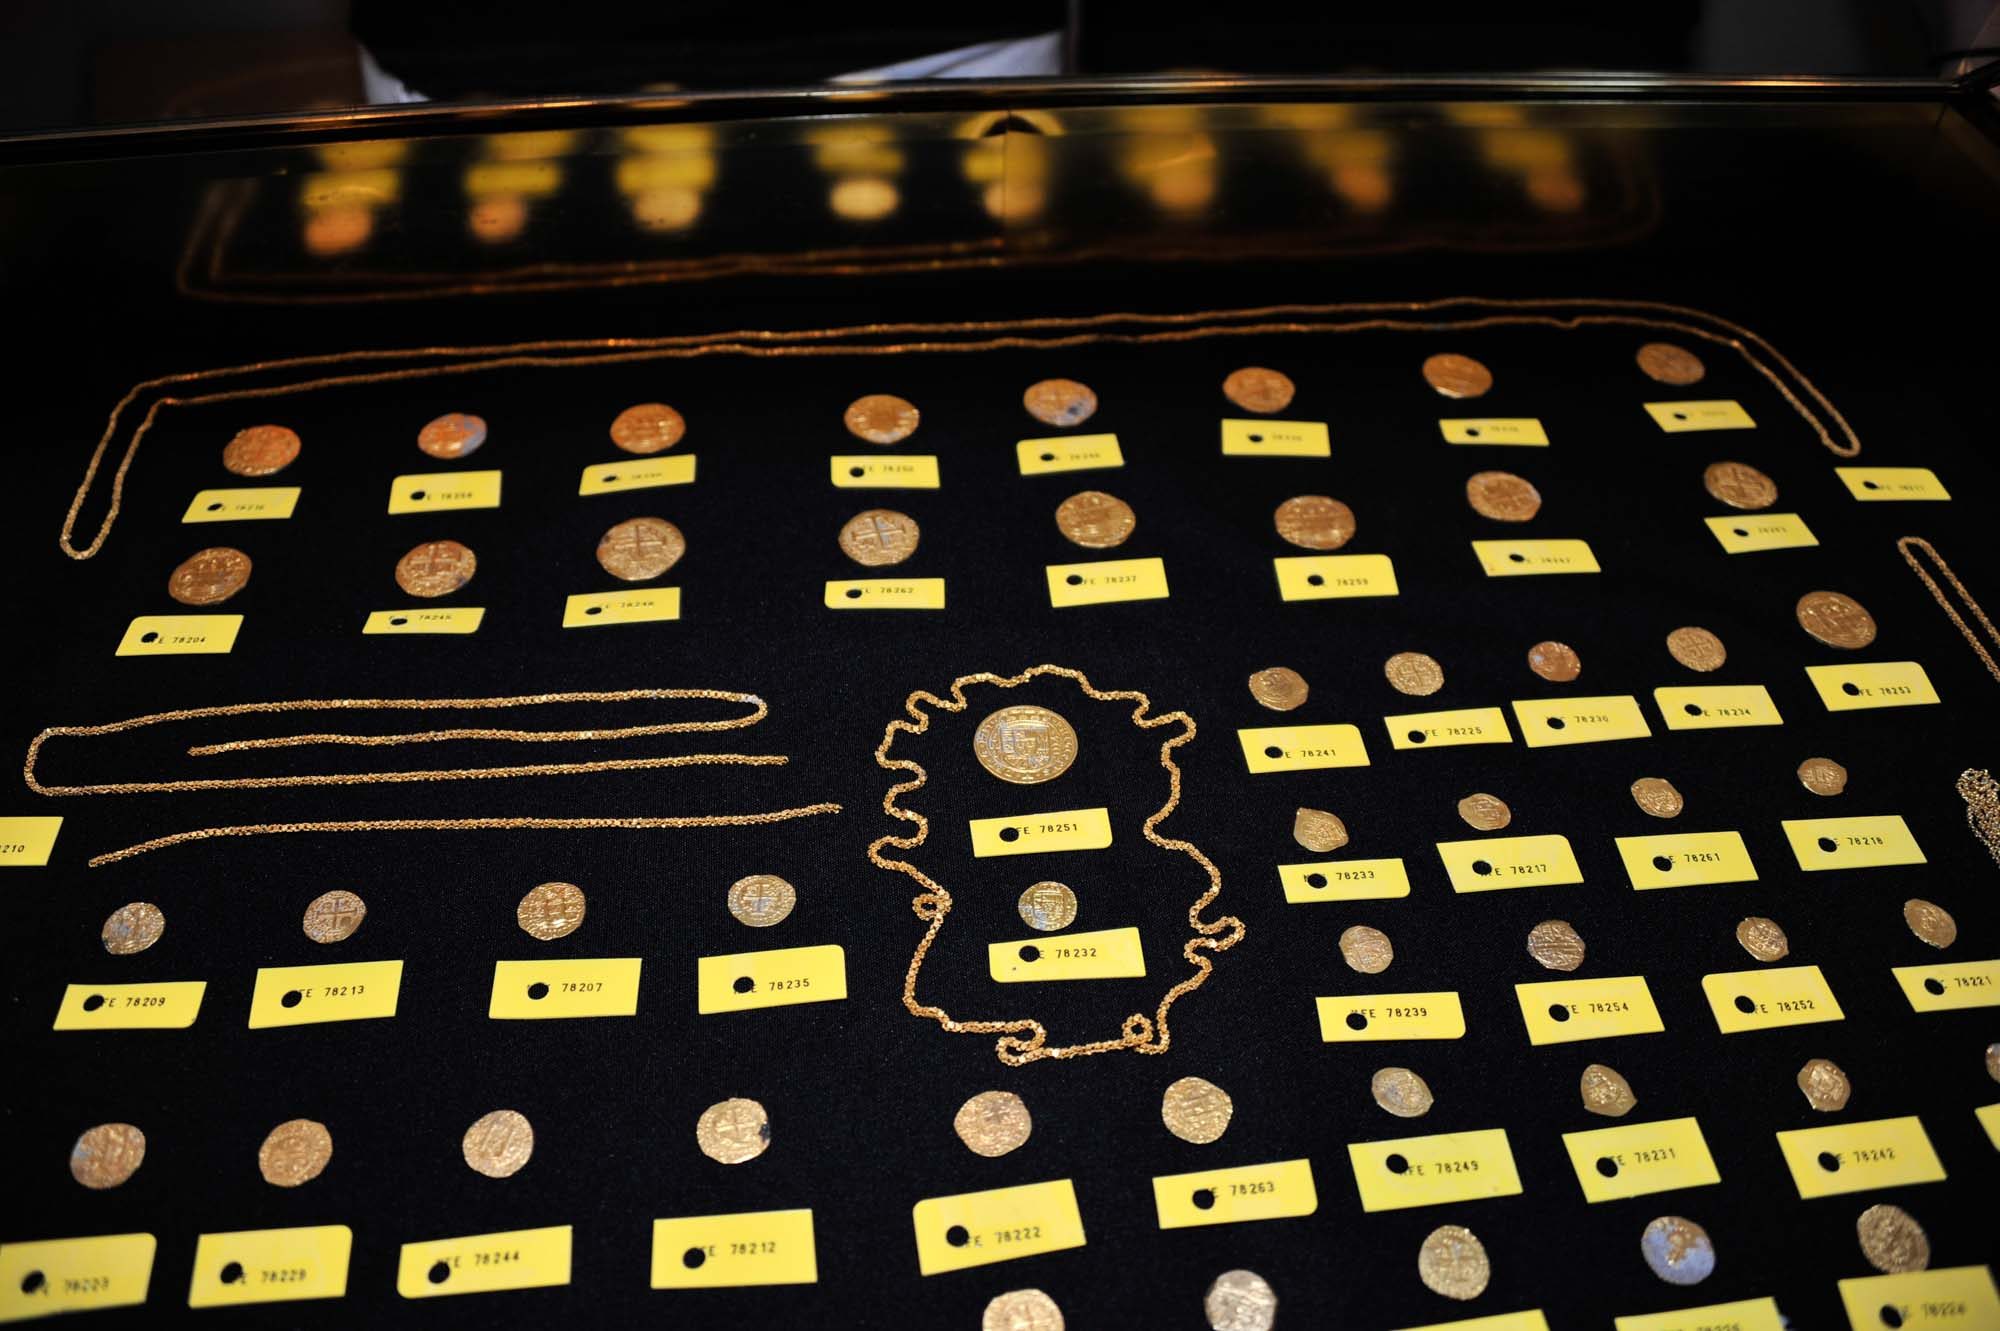 Another close up of the 1715 Tricentennial Royal together ith gold coins and chains